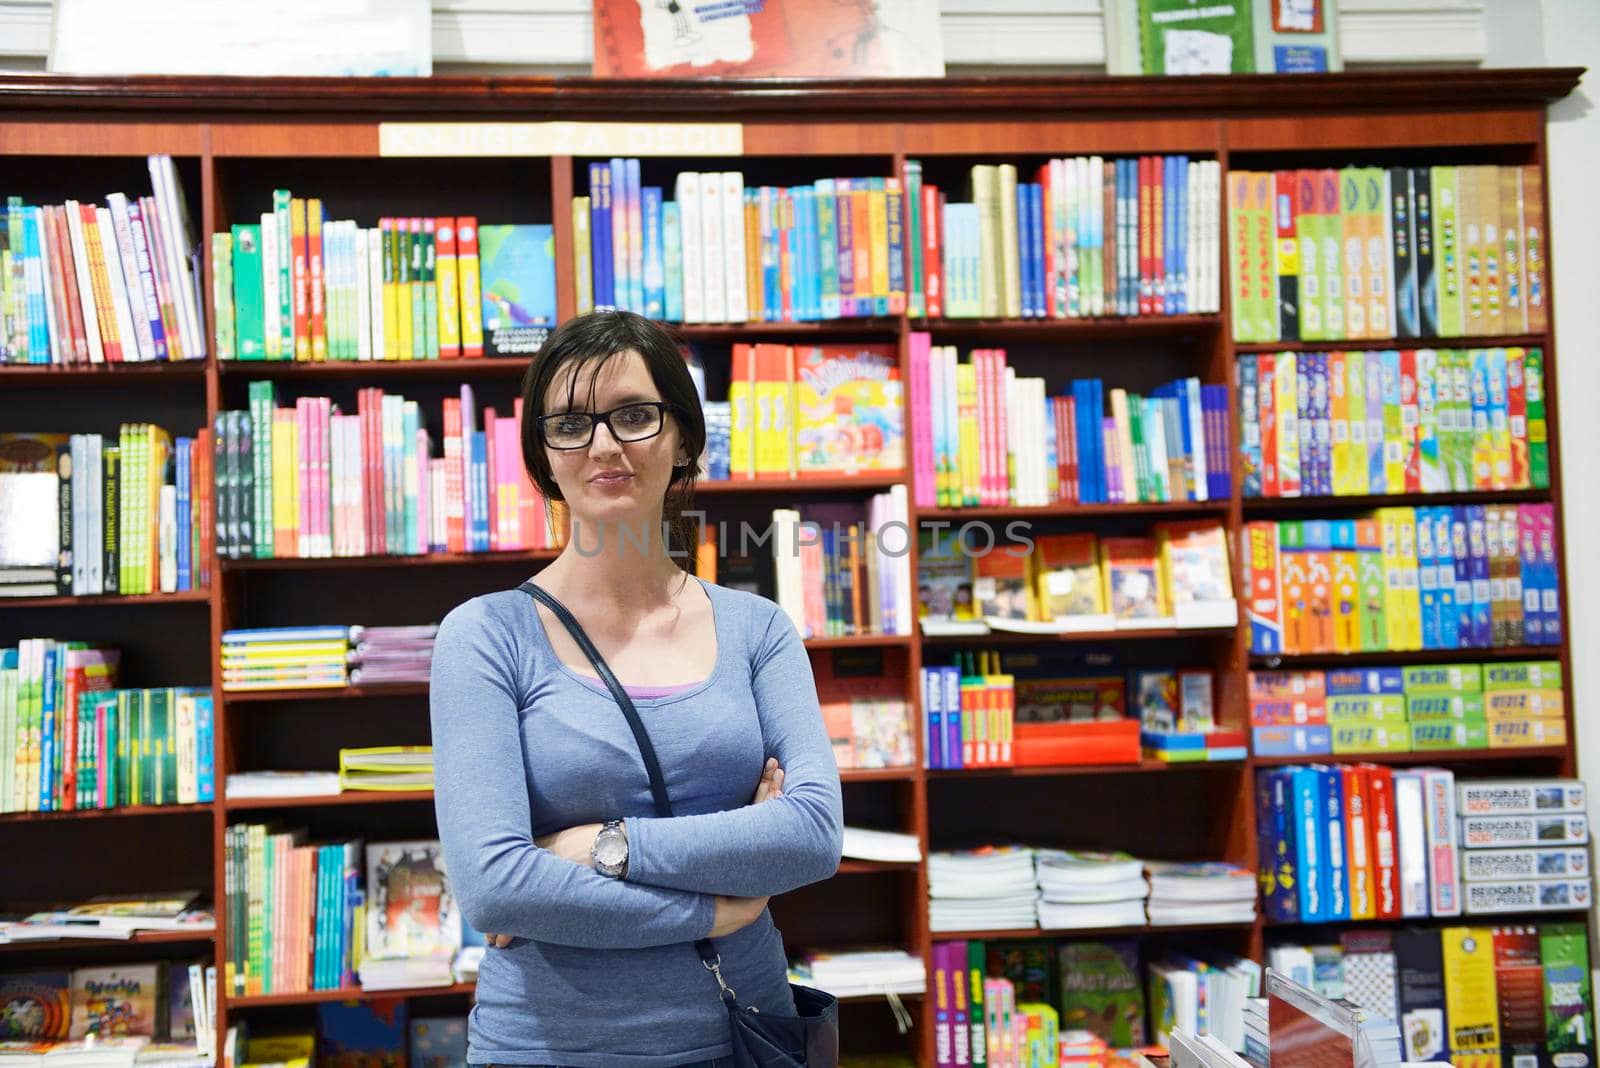 Pretty female student standing at bookshelf in university library store shop  searching for a book